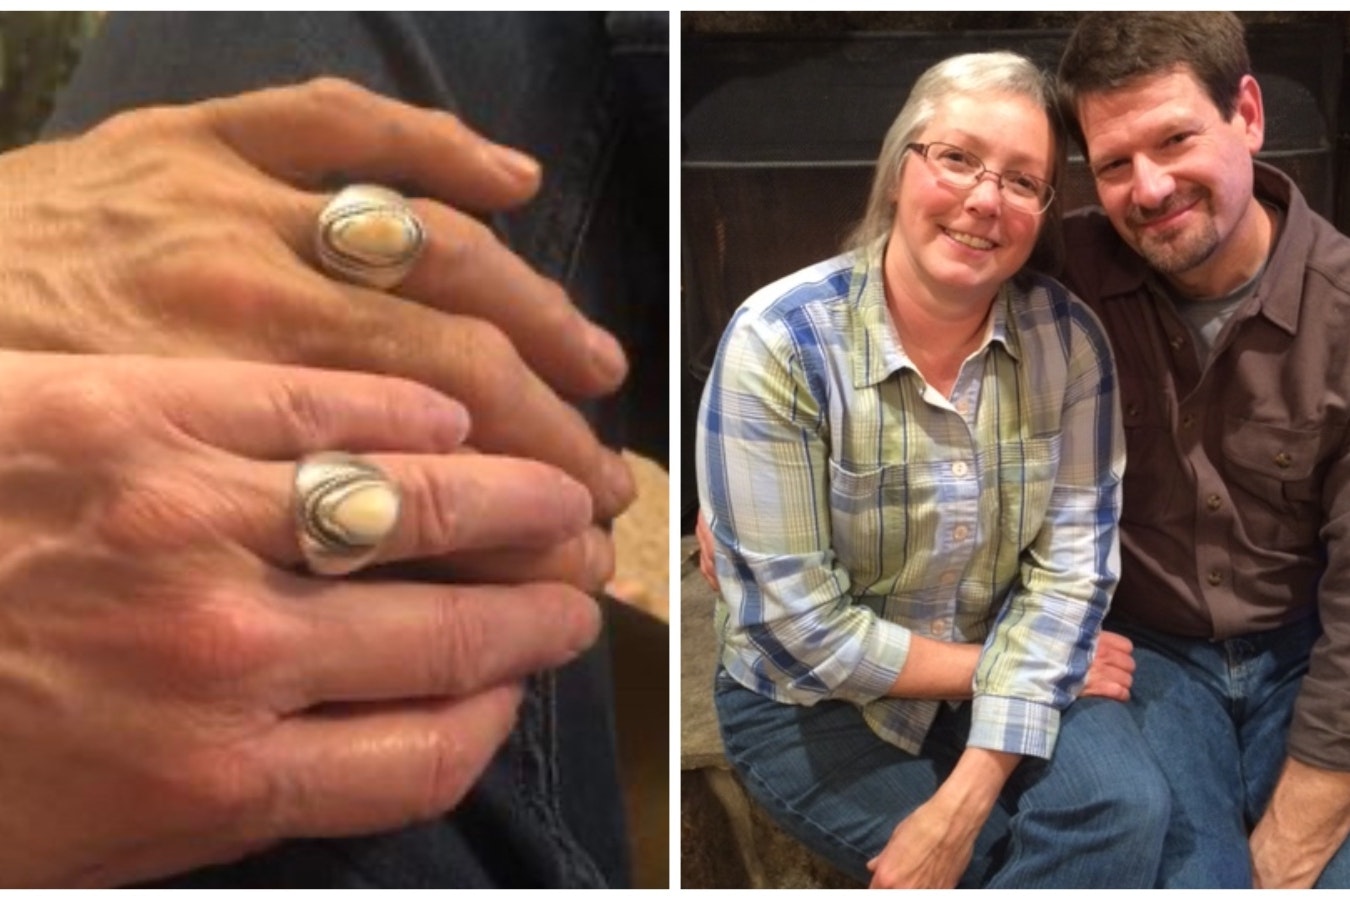 Teri and Randy Rowland of Sheridan are happy to have Teri’s wedding ring back. The couple have been married for 25 years, and she lost hers last Sunday at an exit along I-25. Against all odds, she got it back.